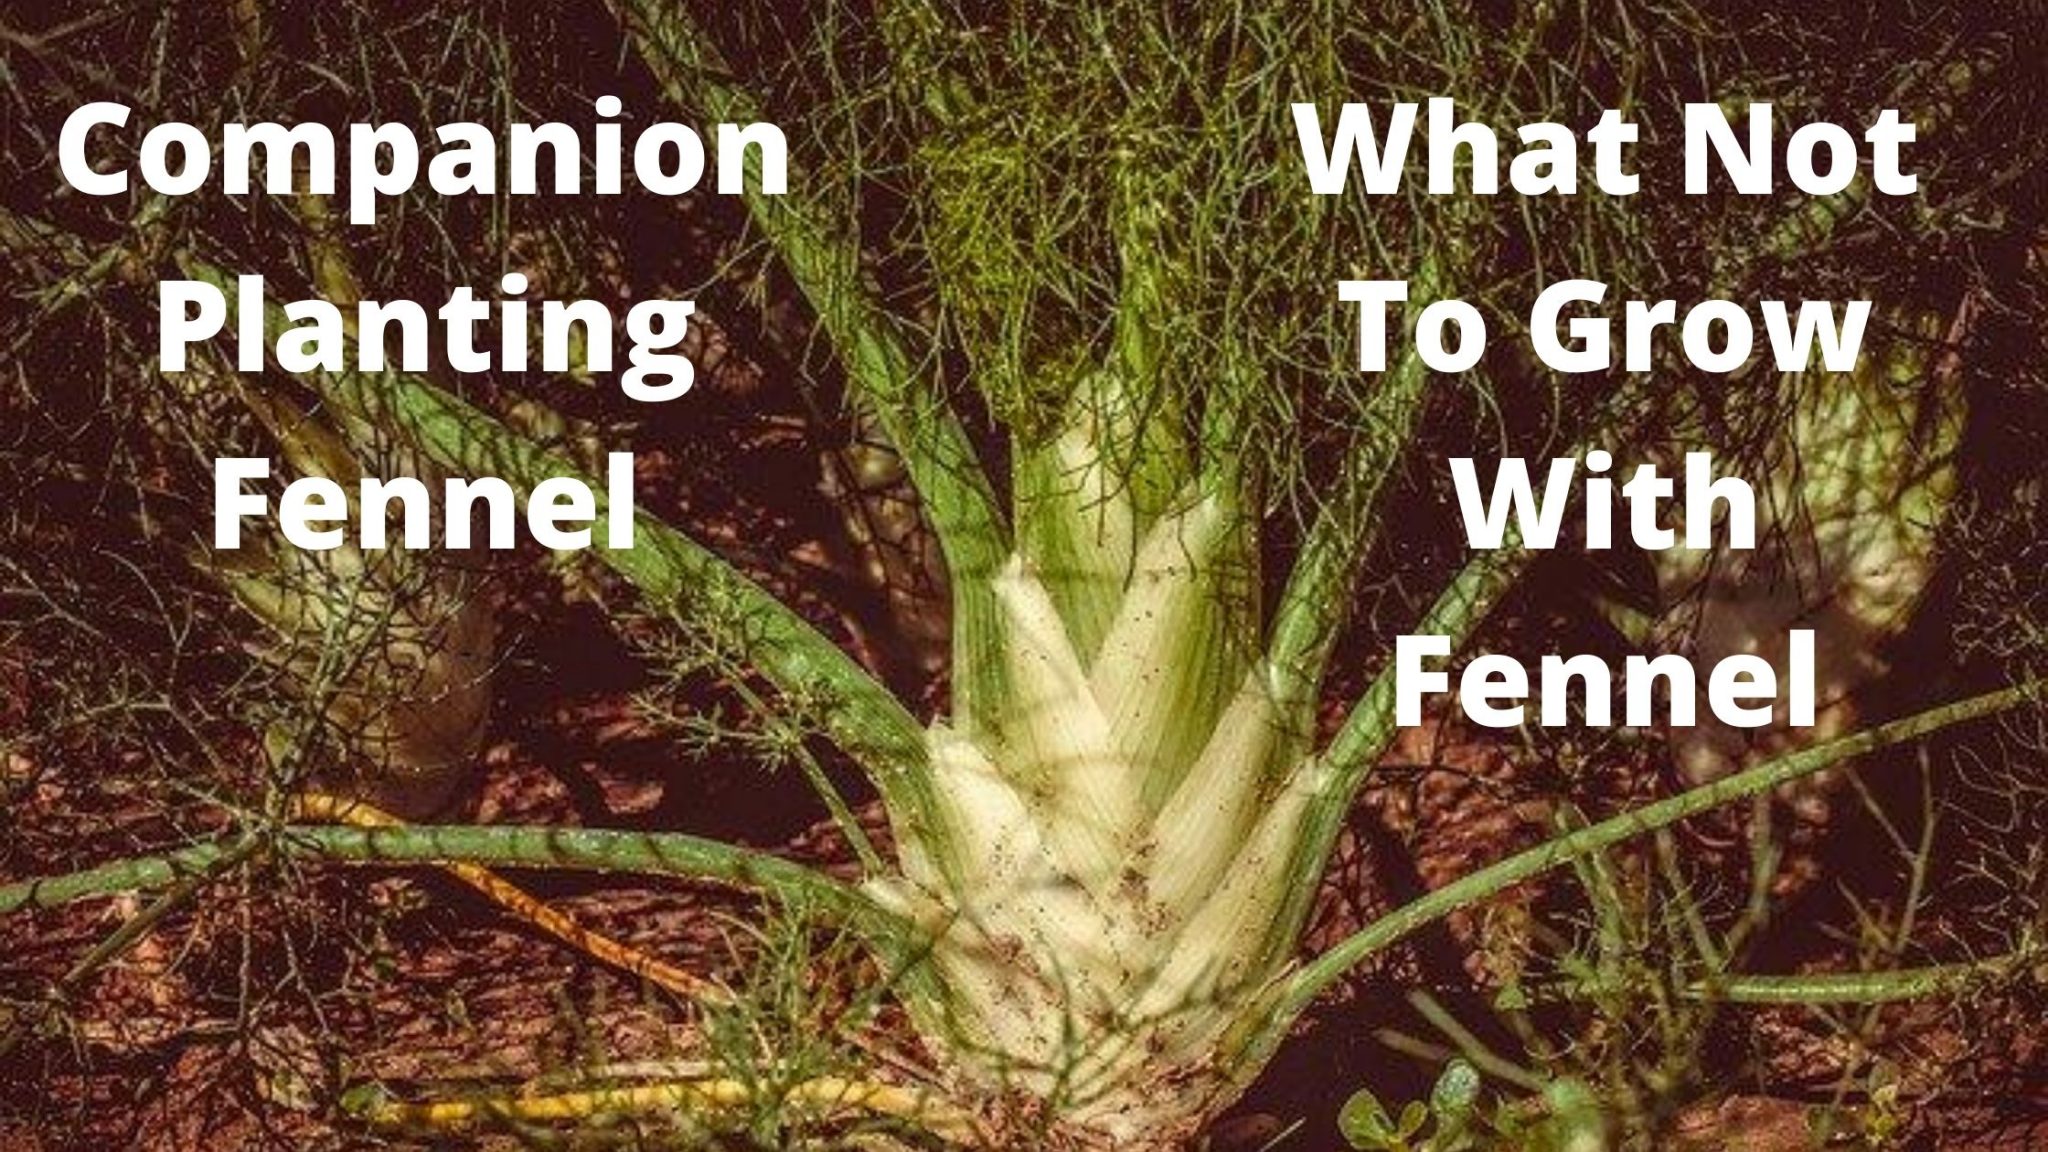 Image of Fennel companion fennel and basil